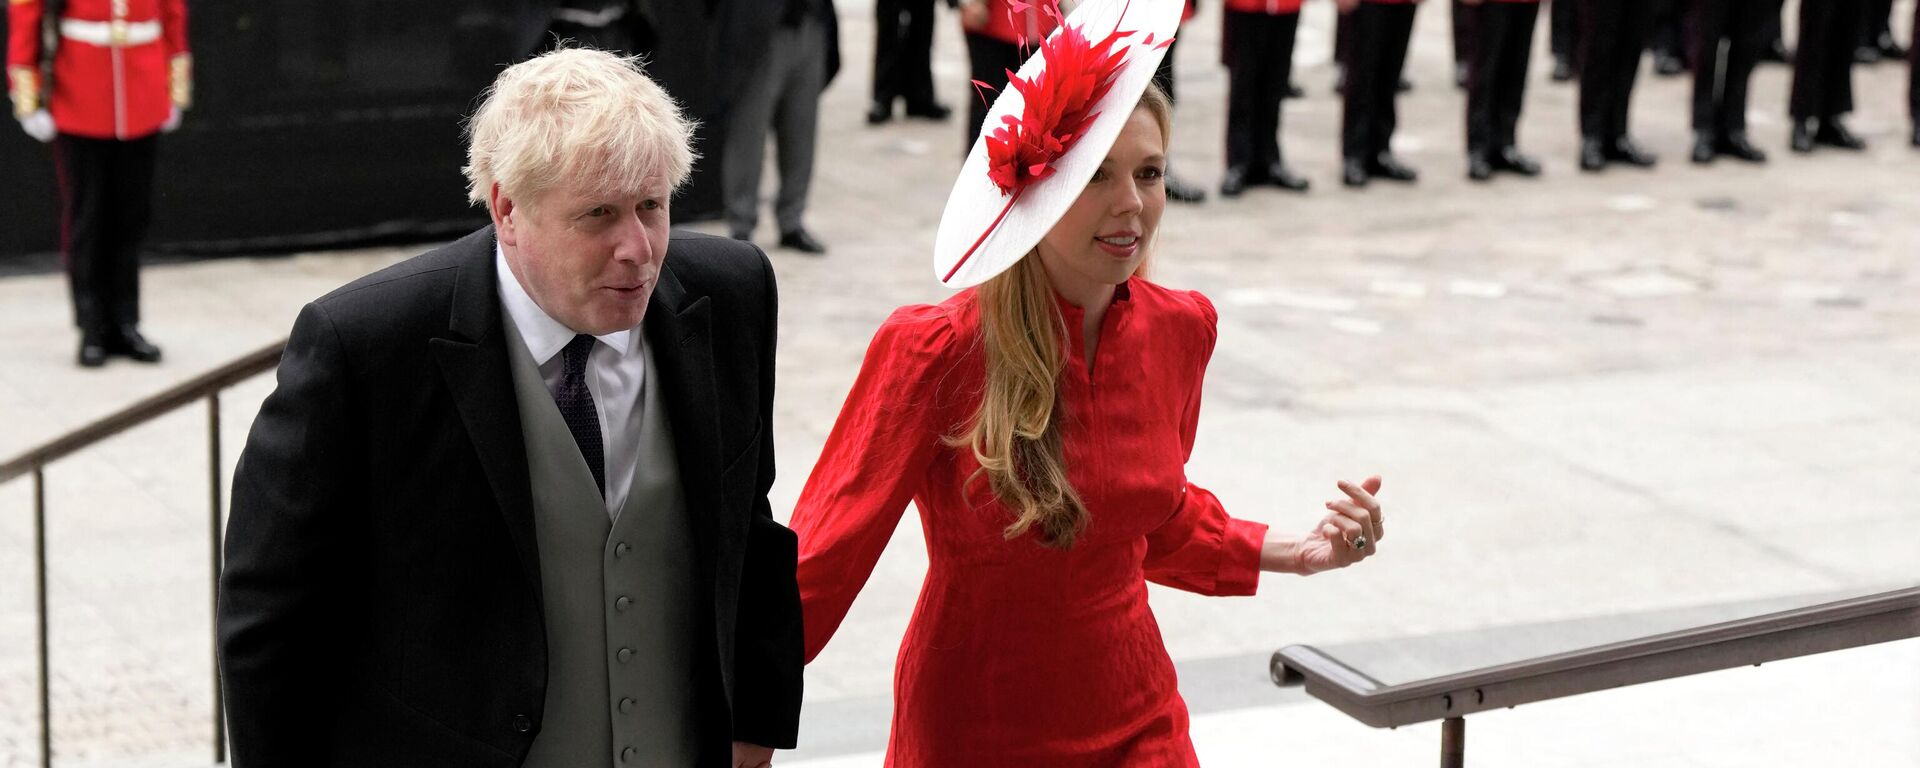 Britain's Prime Minister Boris Johnson and his wife Carrie Symonds arrive to attend the National Service of Thanksgiving for The Queen's reign at Saint Paul's Cathedral in London on June 3, 2022 as part of Queen Elizabeth II's platinum jubilee celebrations. - Sputnik International, 1920, 03.06.2022